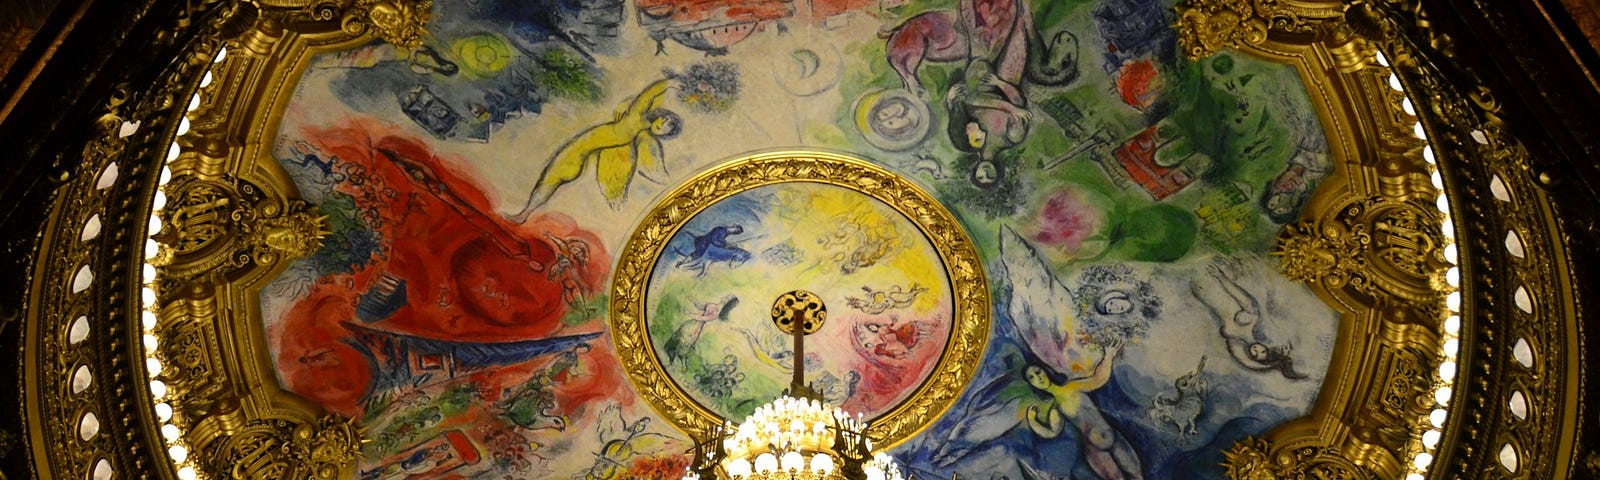 Chagall on the ceiling. Photo by Katie Barrett on Unsplash